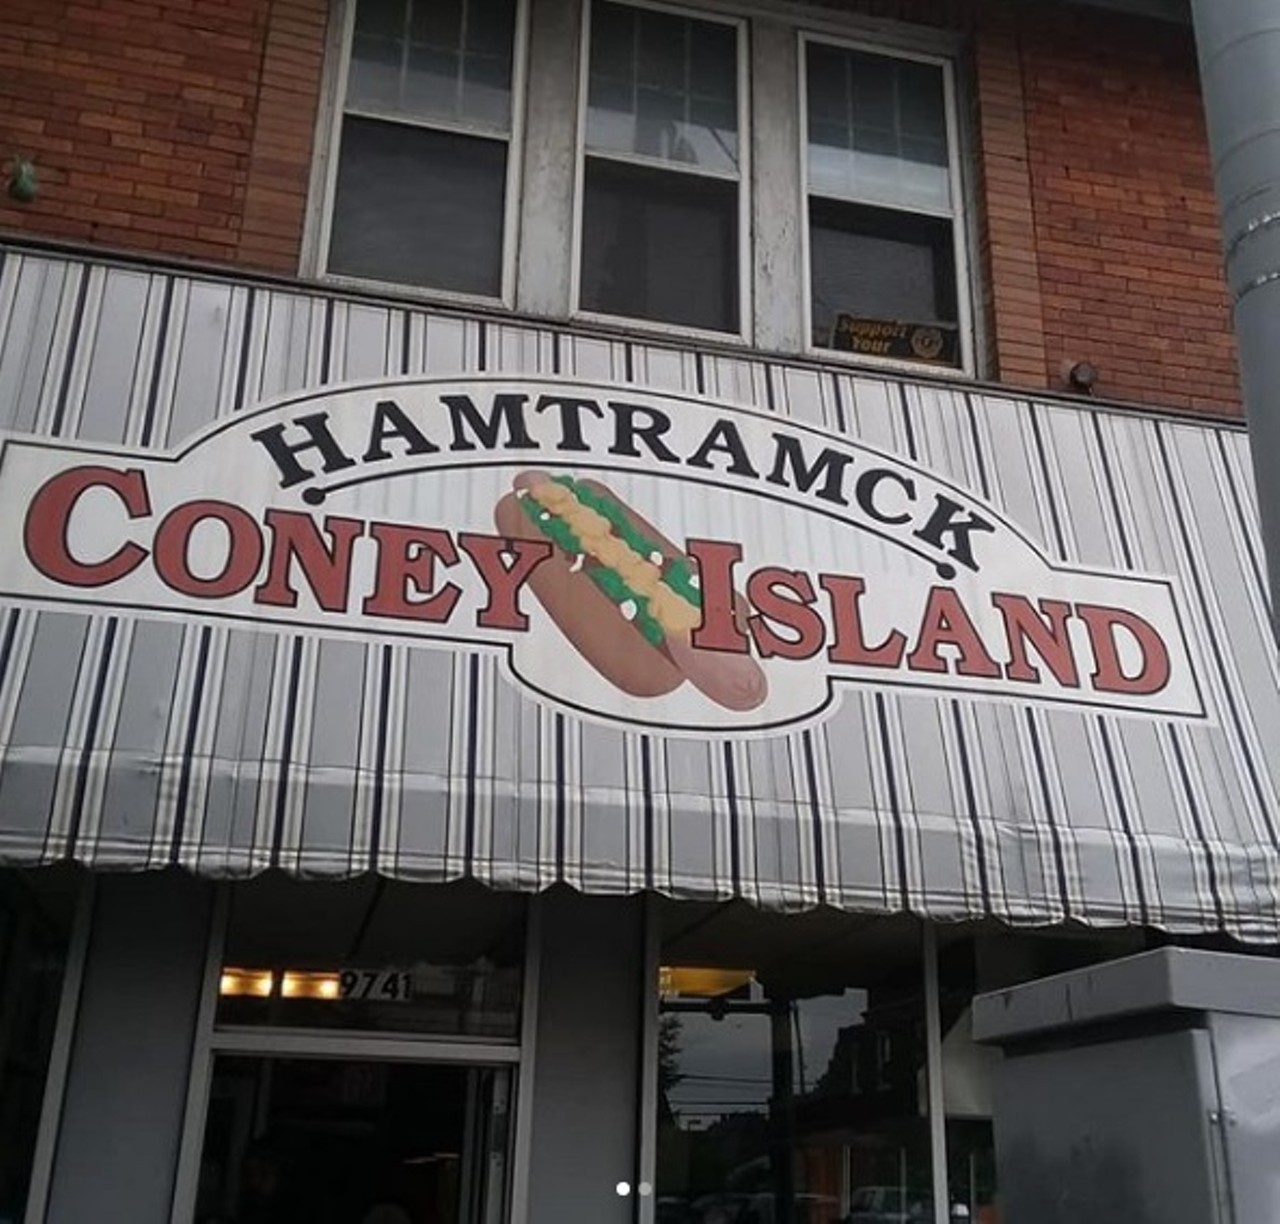 15. Hamtramck Coney Island
9741 Joseph Campau Ave., Hamtramck
No one can compete with the consistent love that this downtown Hamtown staple gets from people of all backgrounds.
Photo with permission from ericapnea